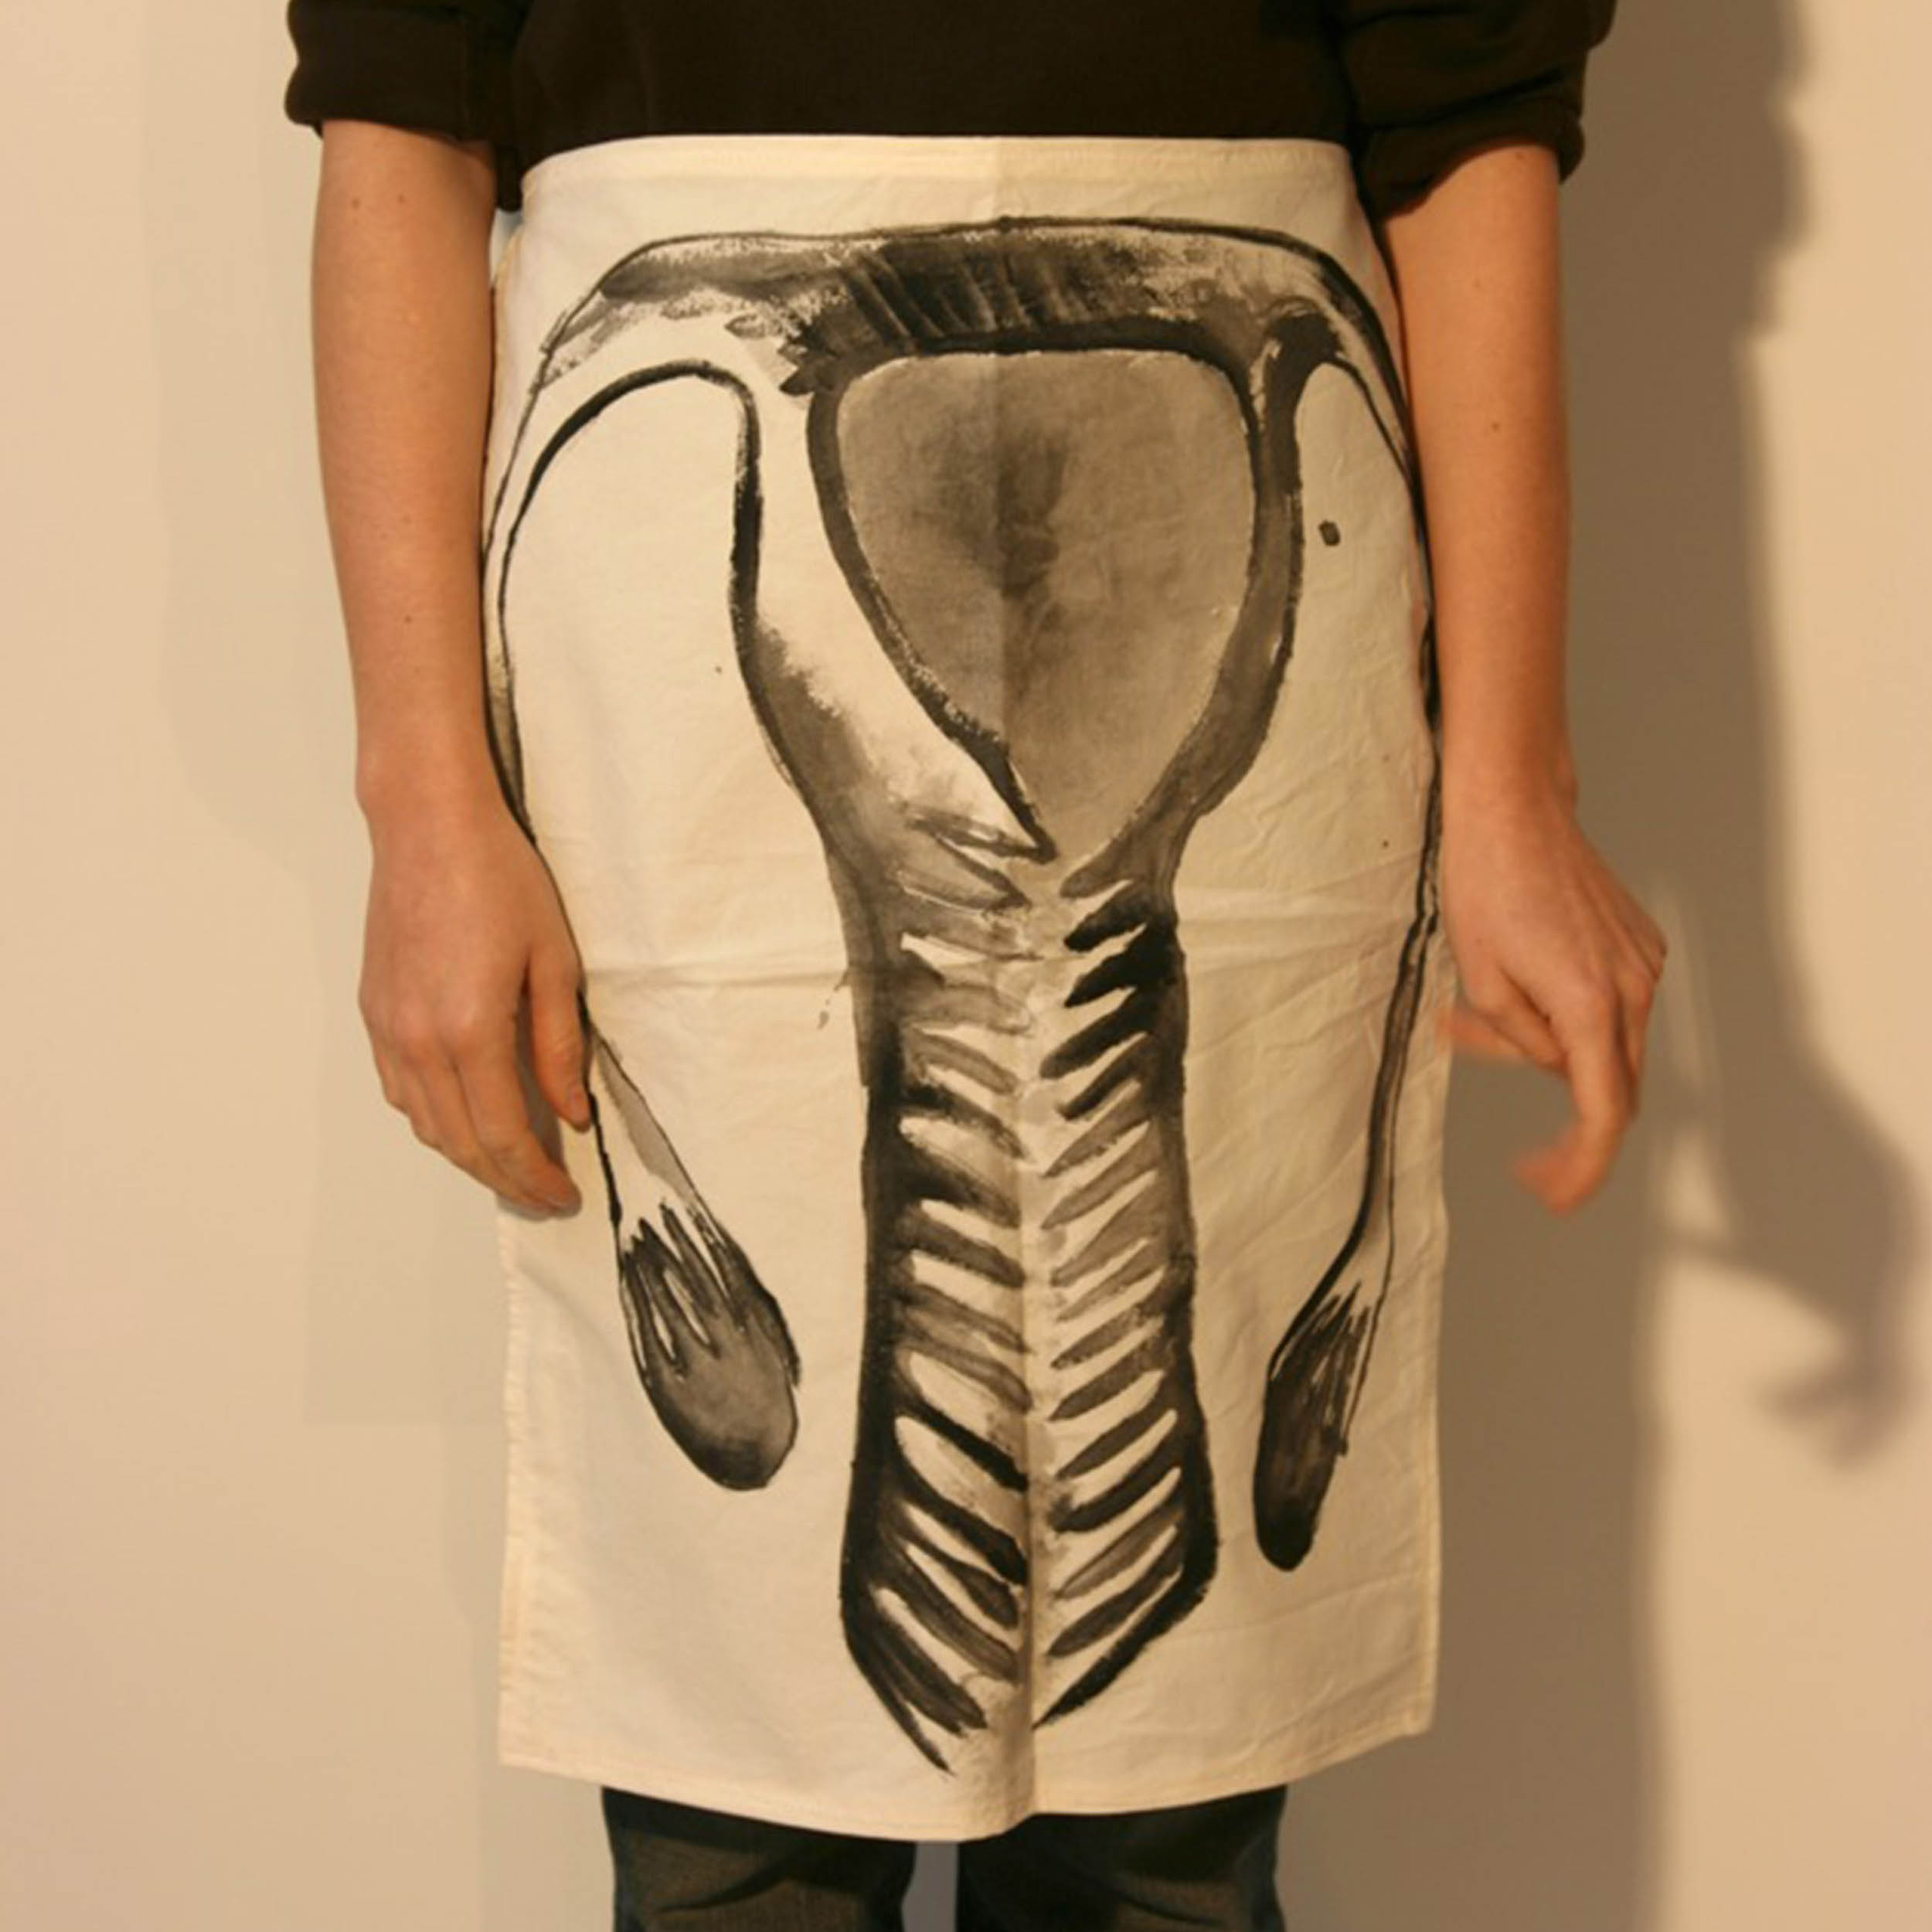 A person wears an apron from the waist down that depicts a stylized version of the female reproductive system.